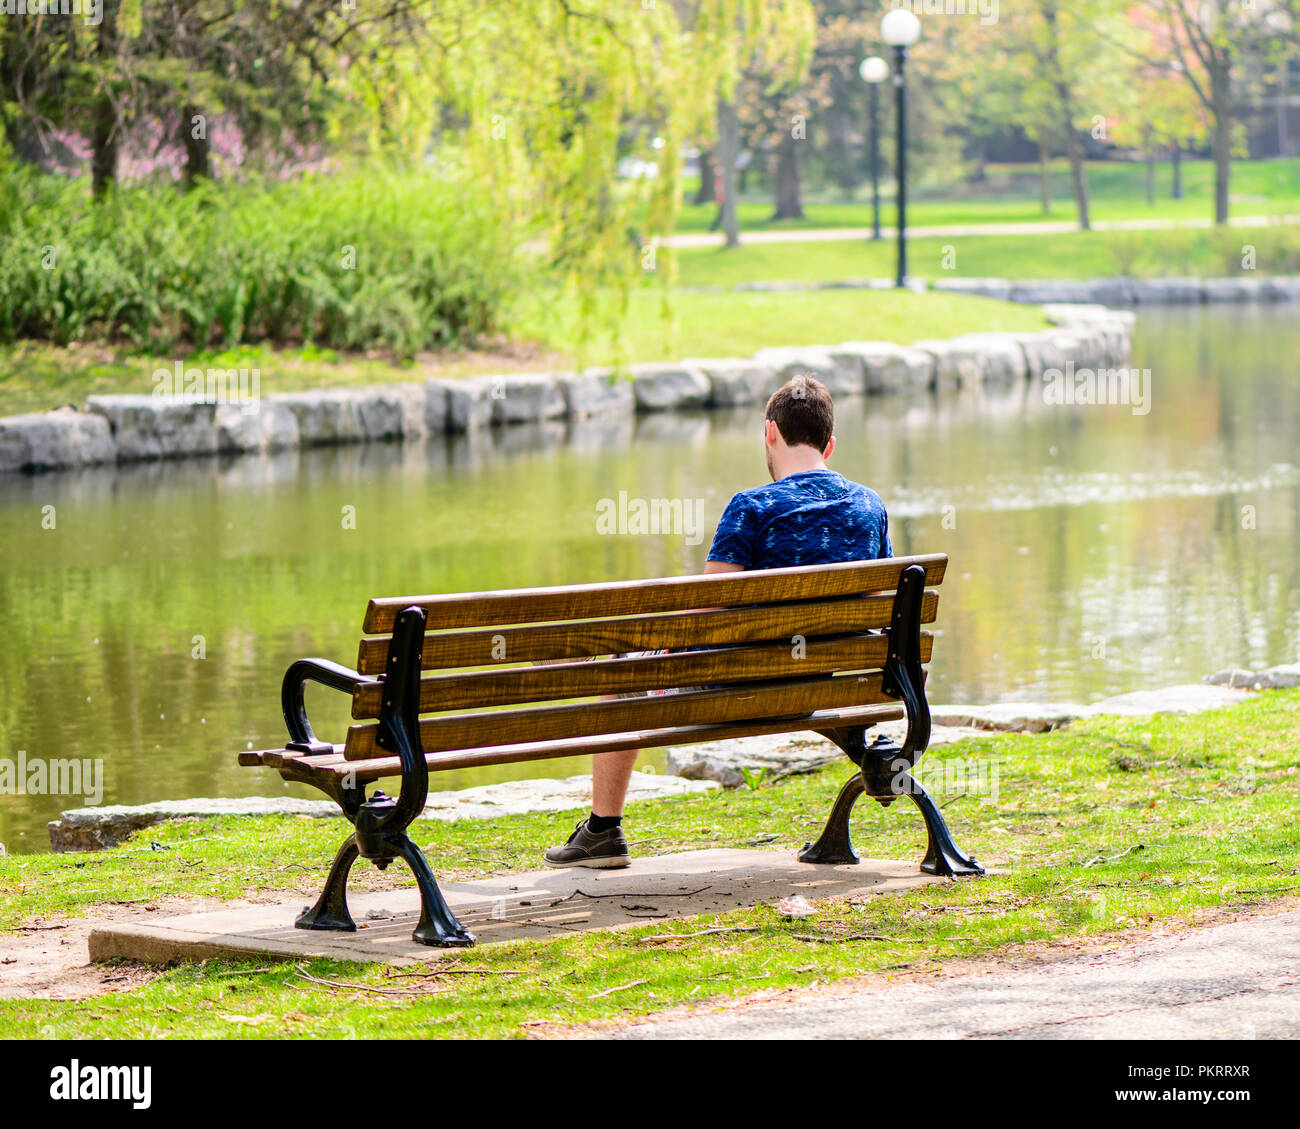 Man Sitting On A Park Bench Near A River With Trees In The Background Stock Photo